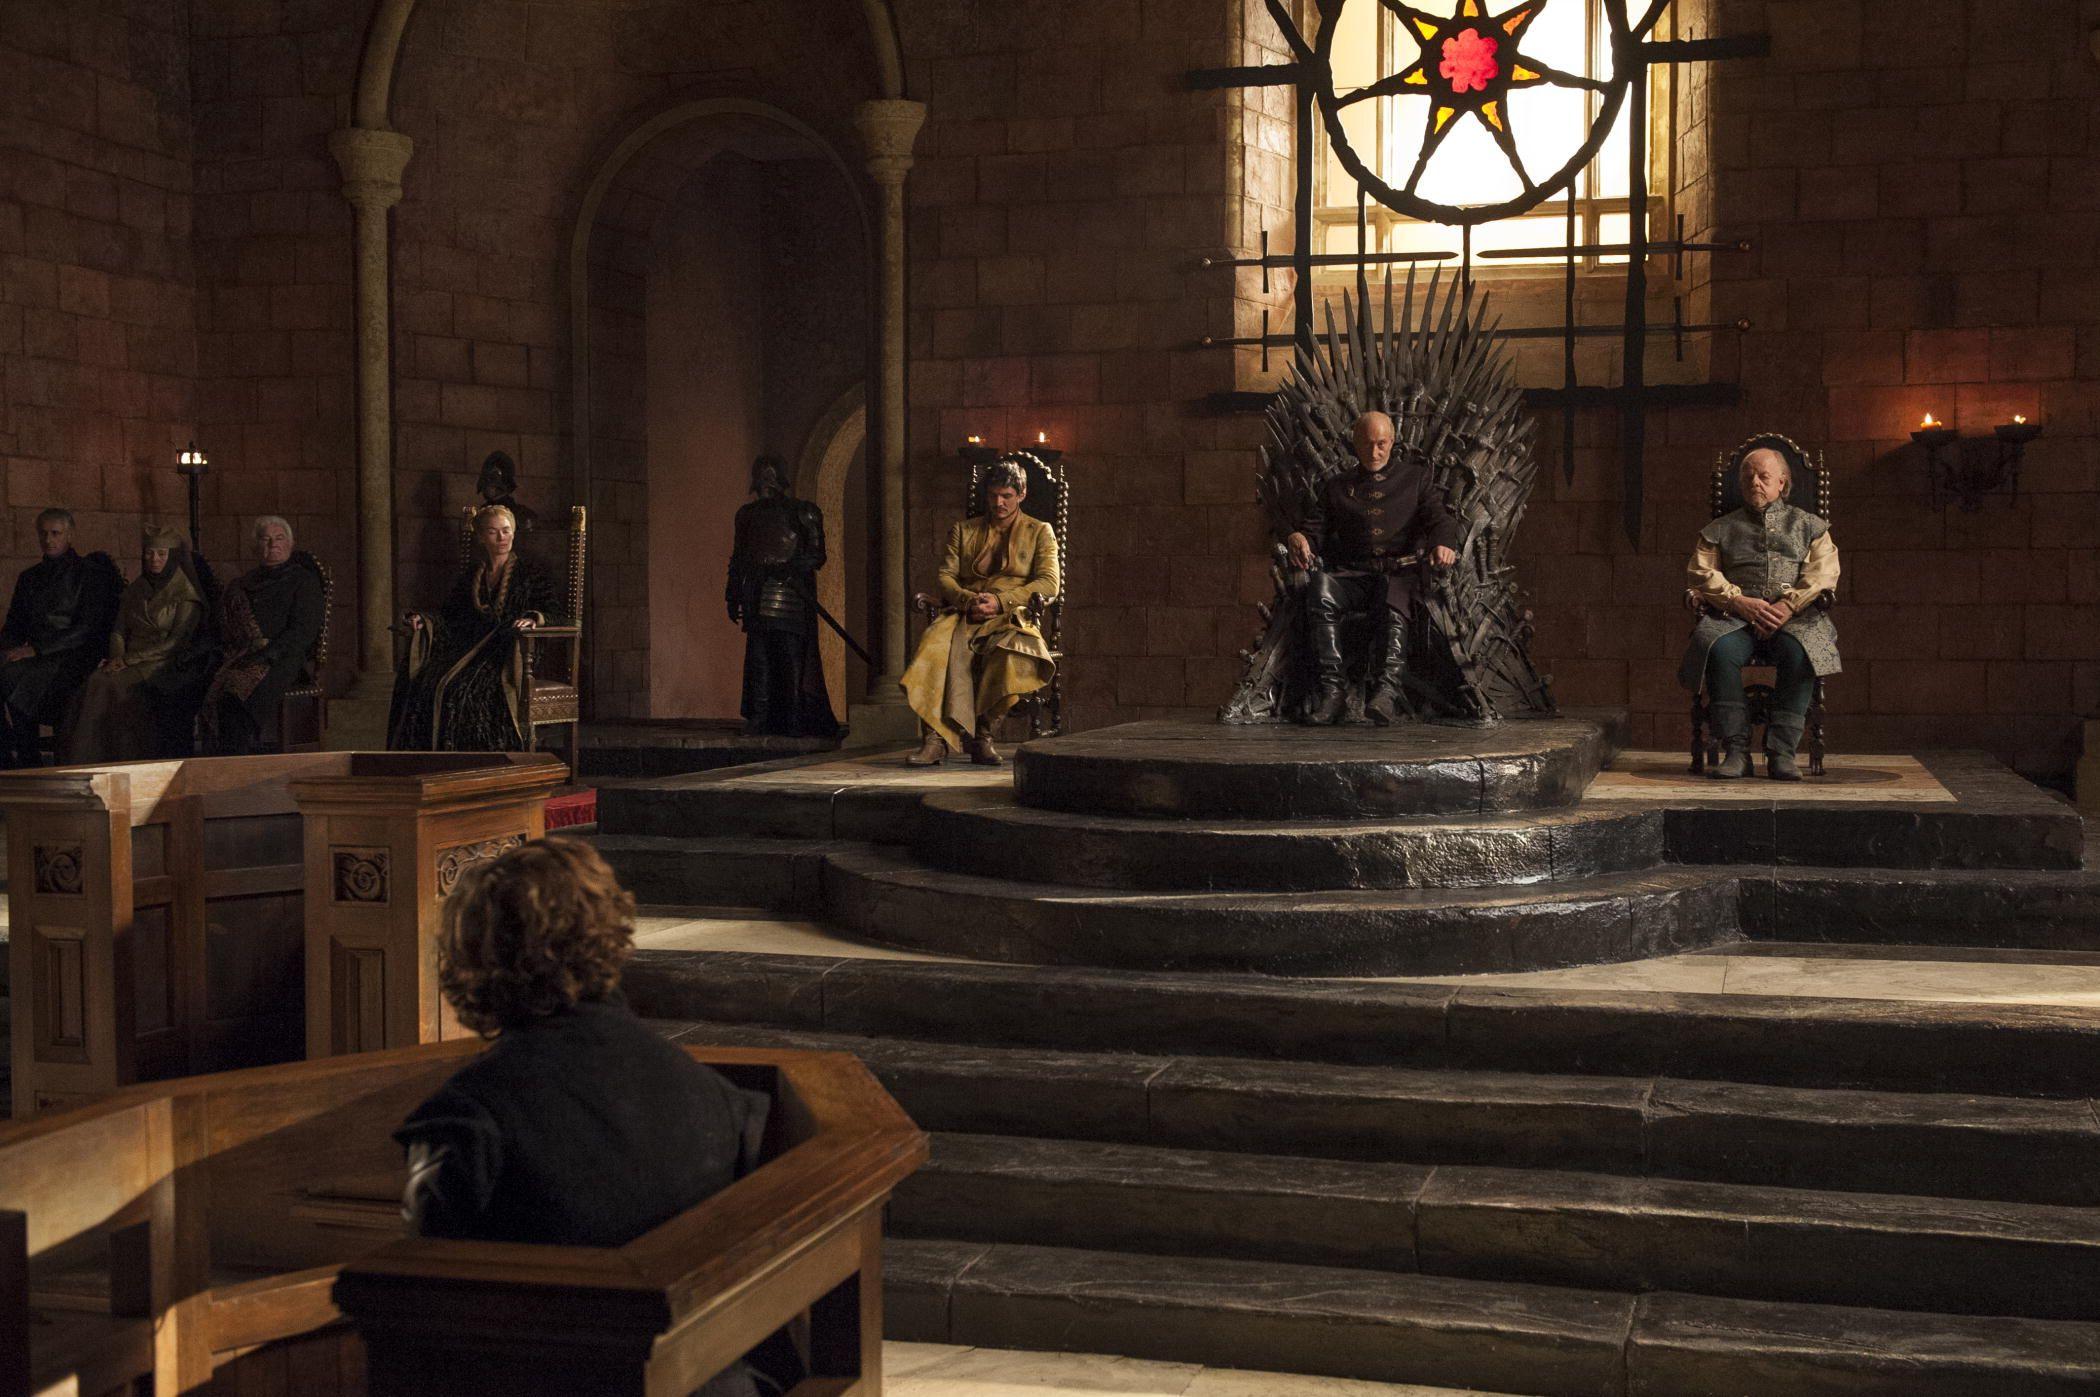 Court trial of Tyrion Lannister. Game of Thrones